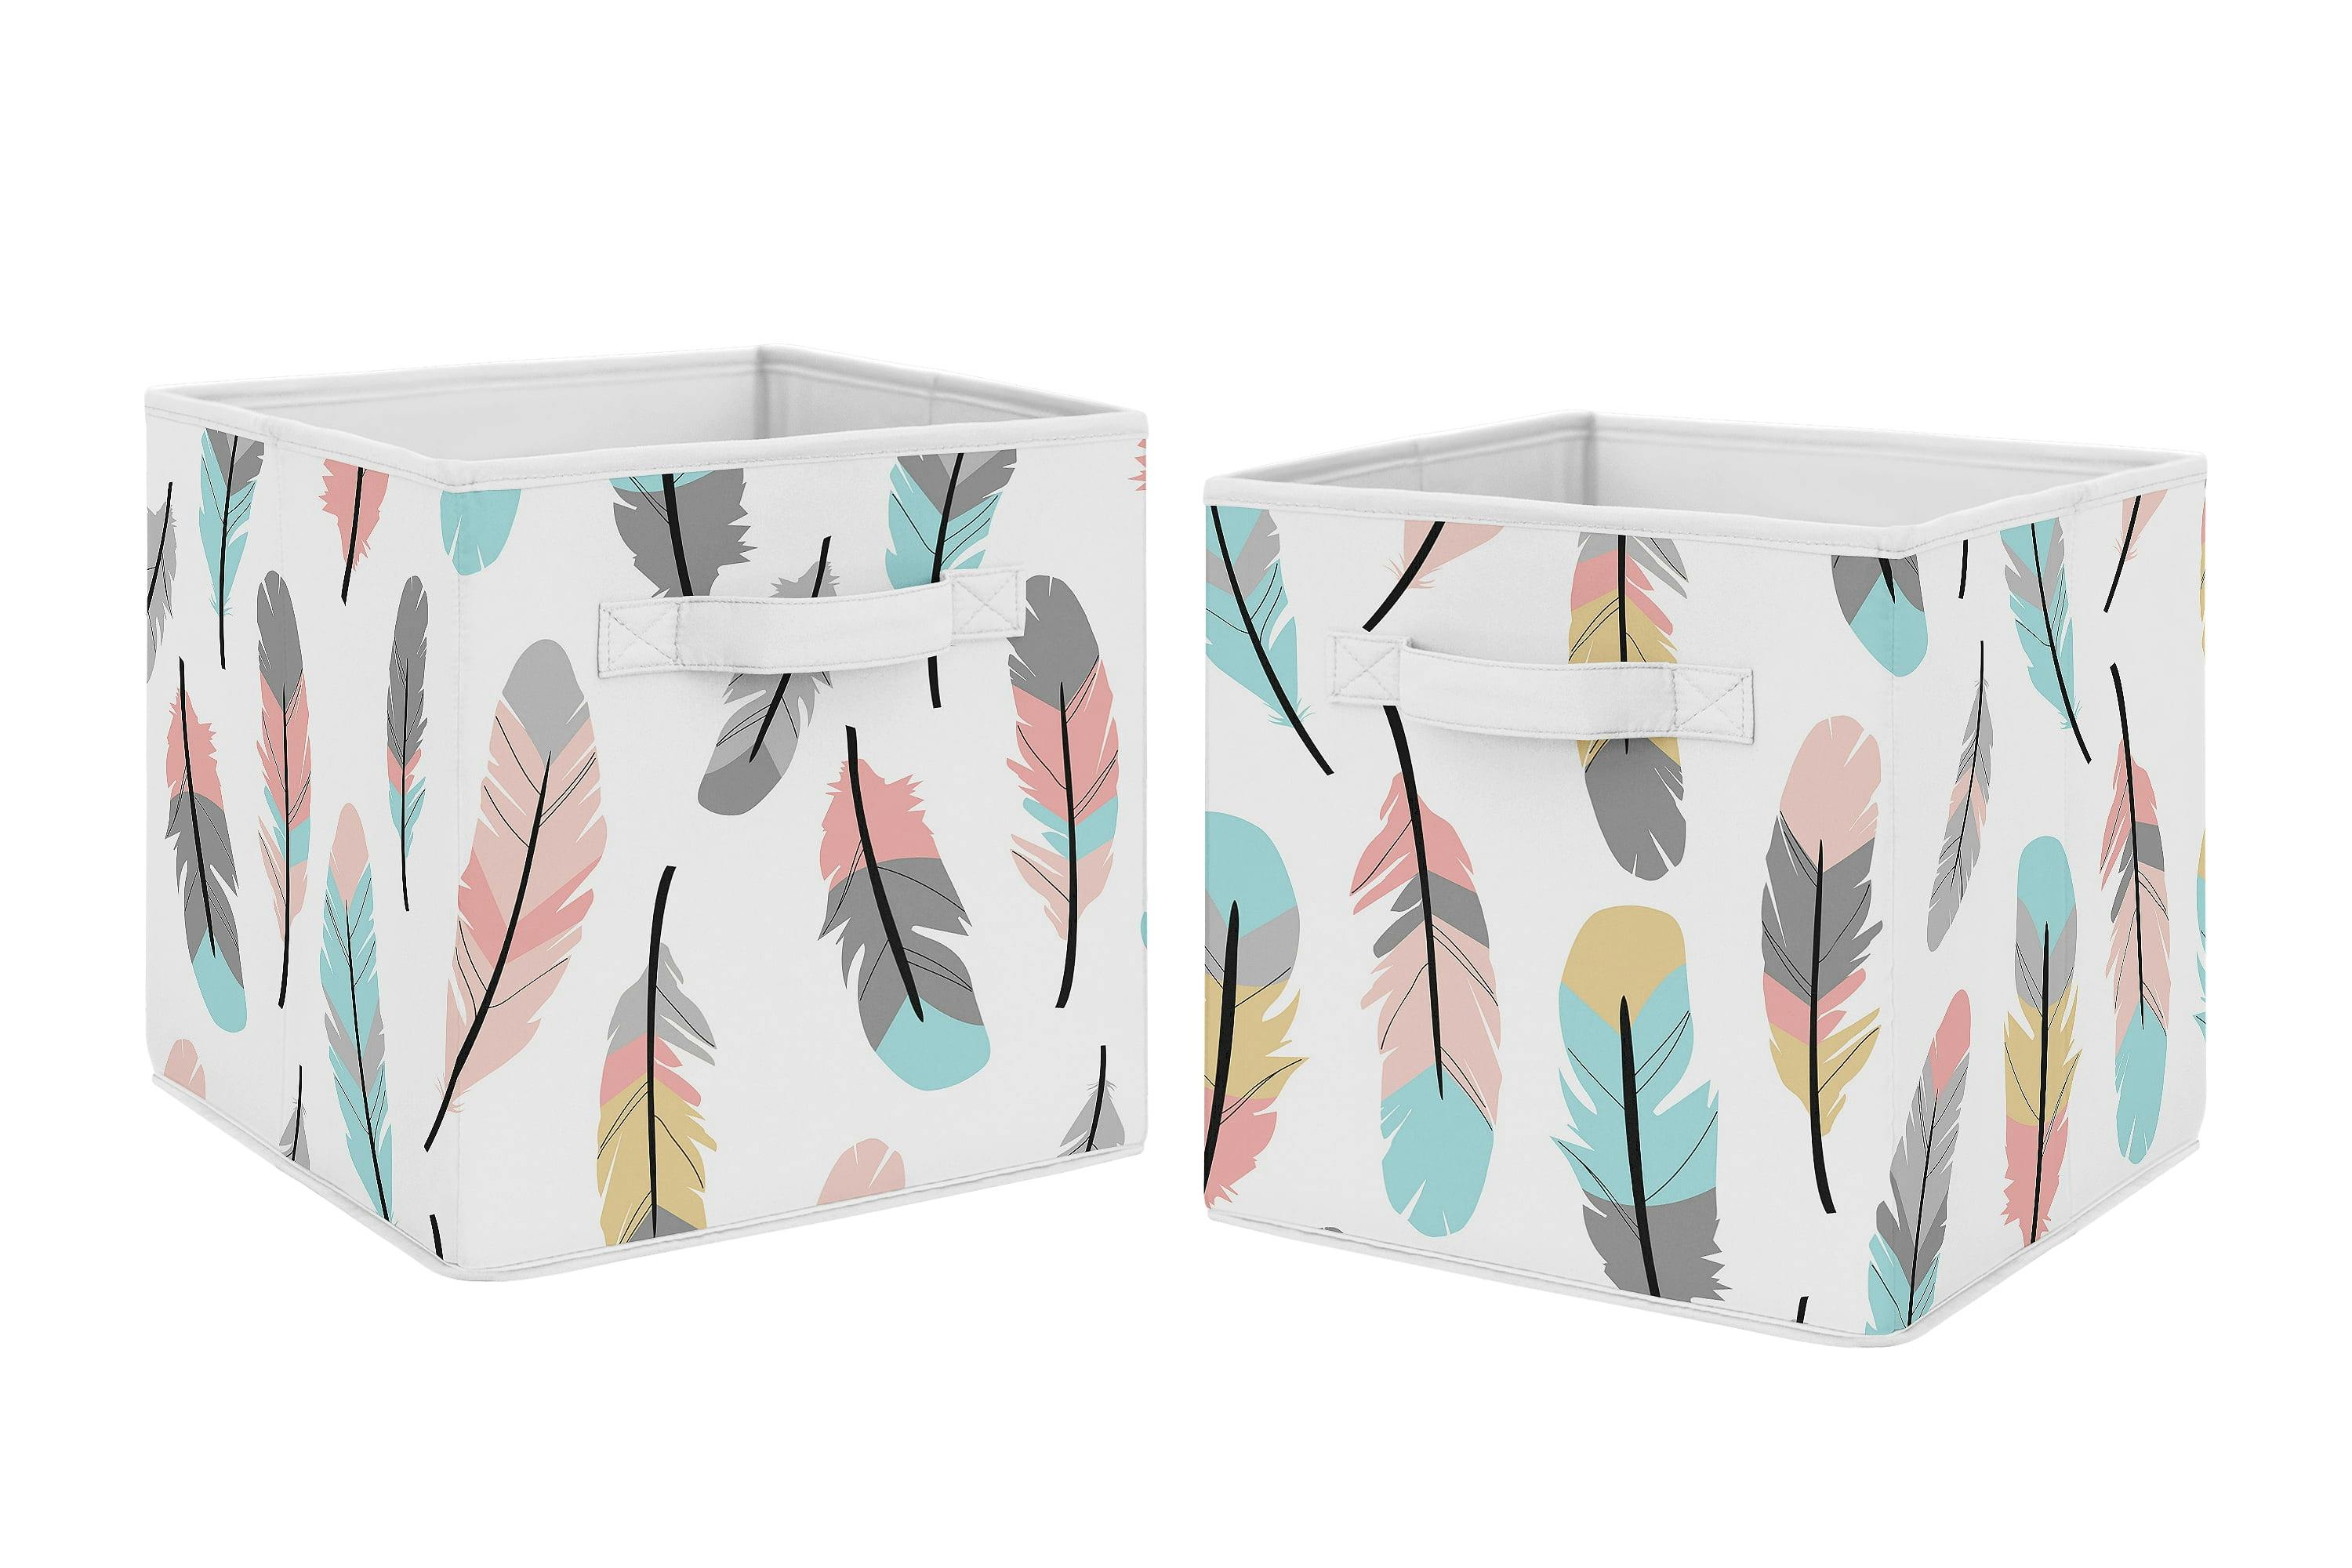 Coral & Turquoise Feather Print Collapsible Fabric Storage Cubes (Set of 2)